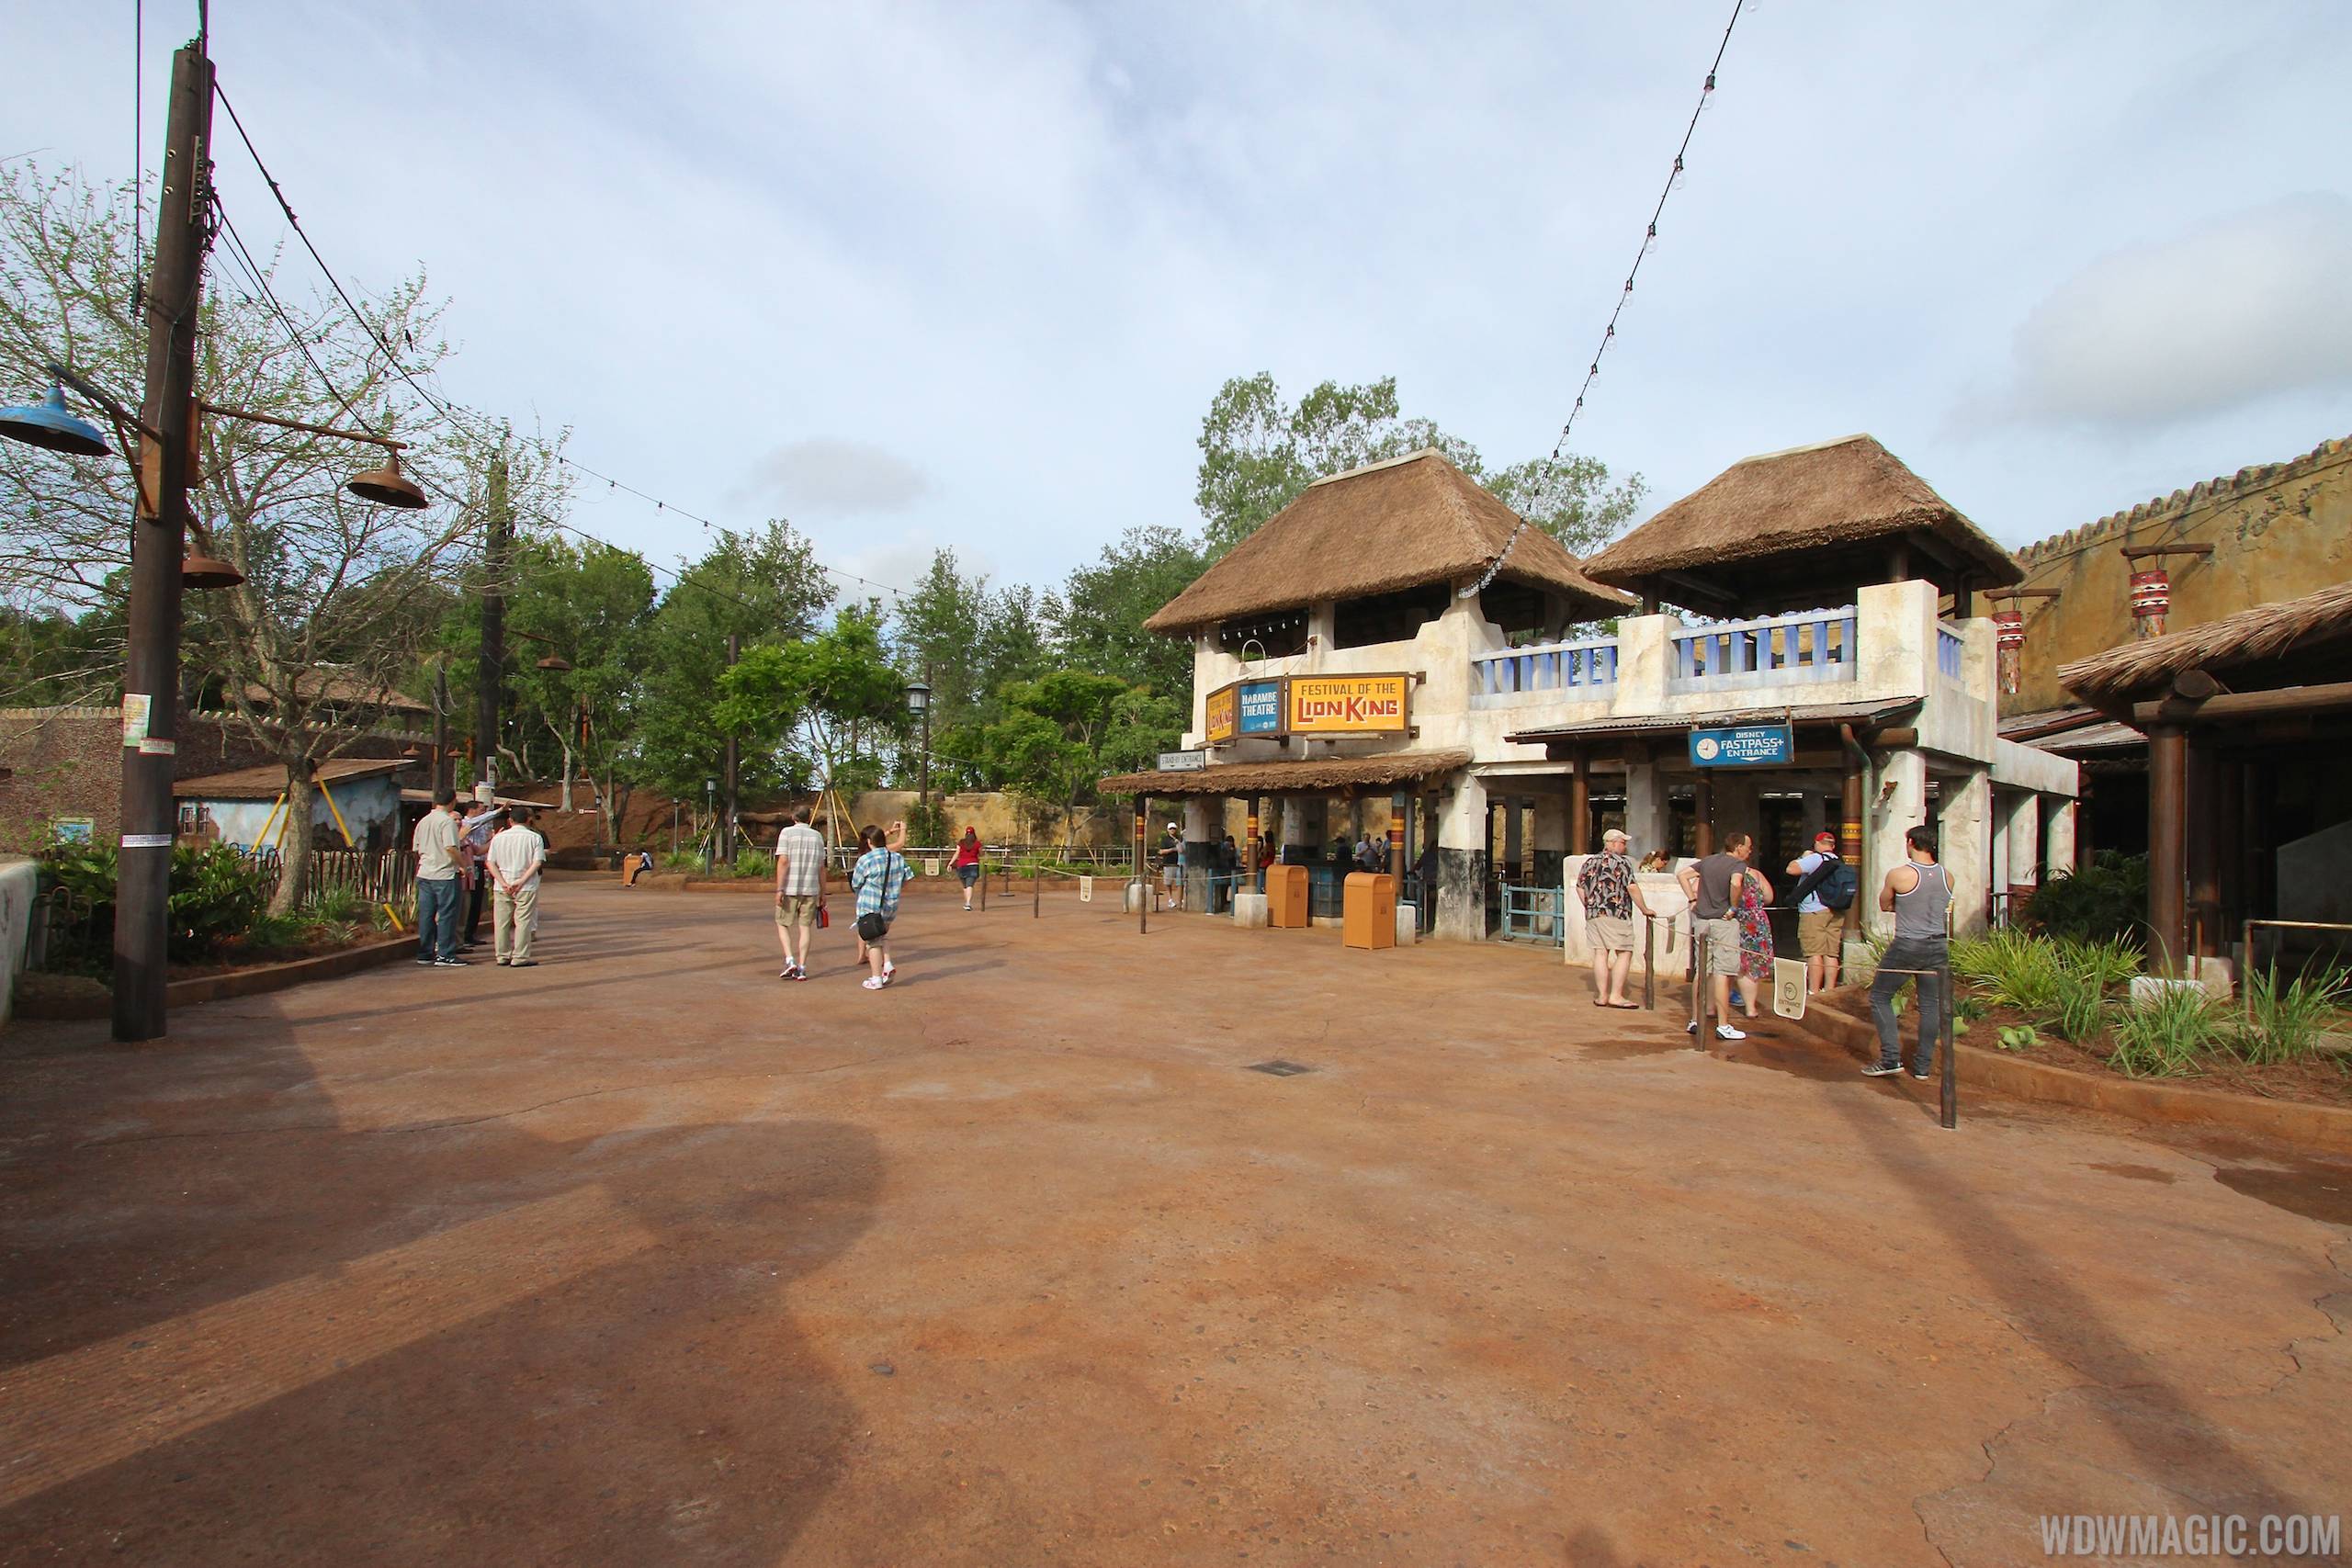 New Harambe Theatre area in Africa - Wide view of the theatre area